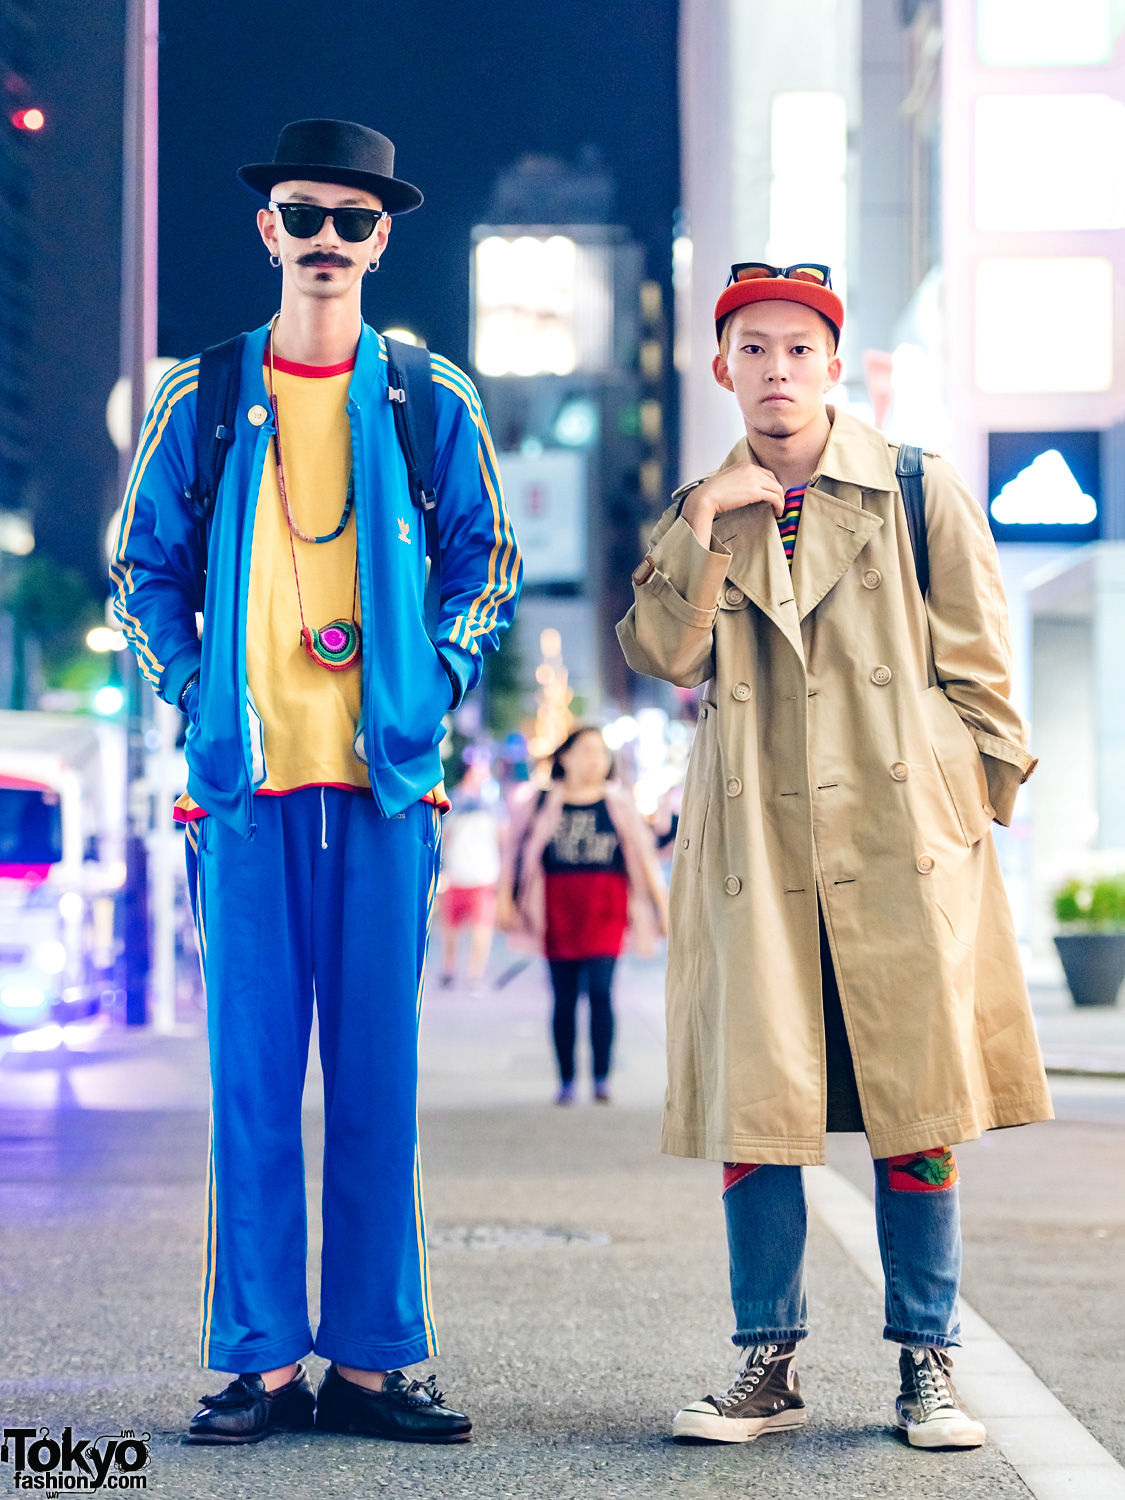 Harajuku Guys in Street Styles w/ Adidas, Ray-Ban, Dexter, Uniqlo x JW Anderson, Marc by Marc Jacobs, ADSR, 80's Converse & 80's Nike